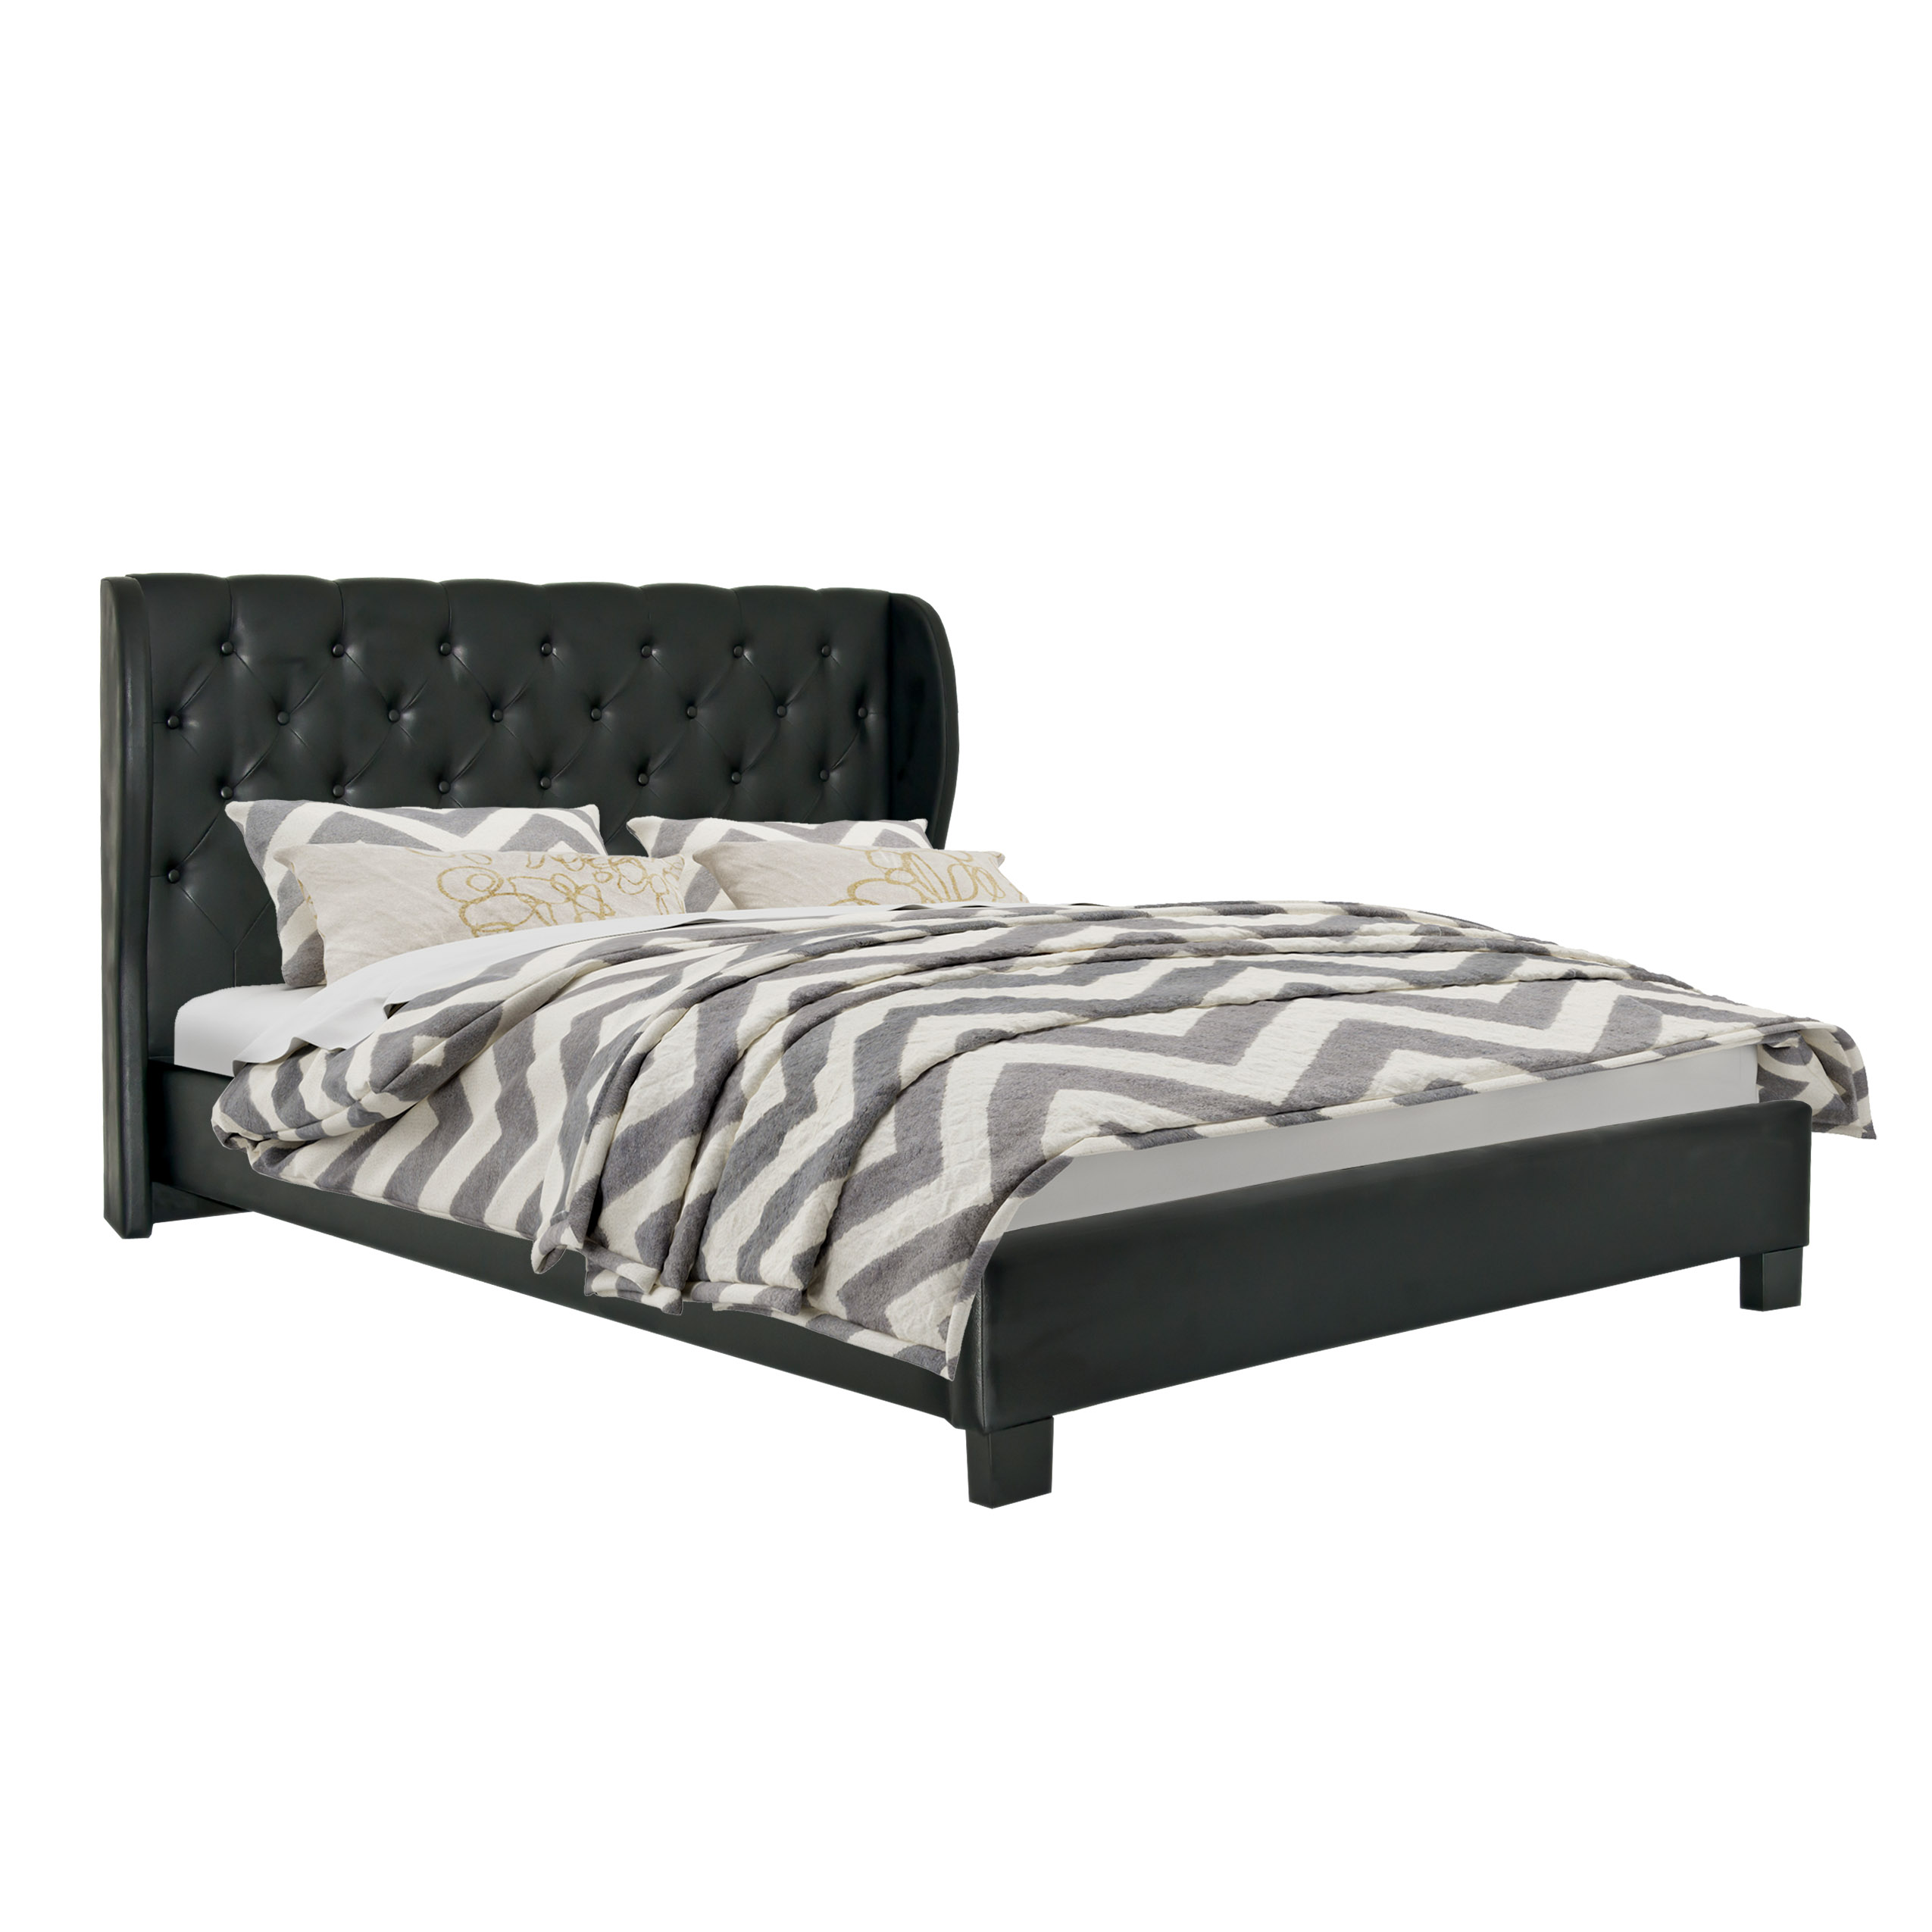 CorLiving Fairfield Tufted Bonded Leather Queen Bed